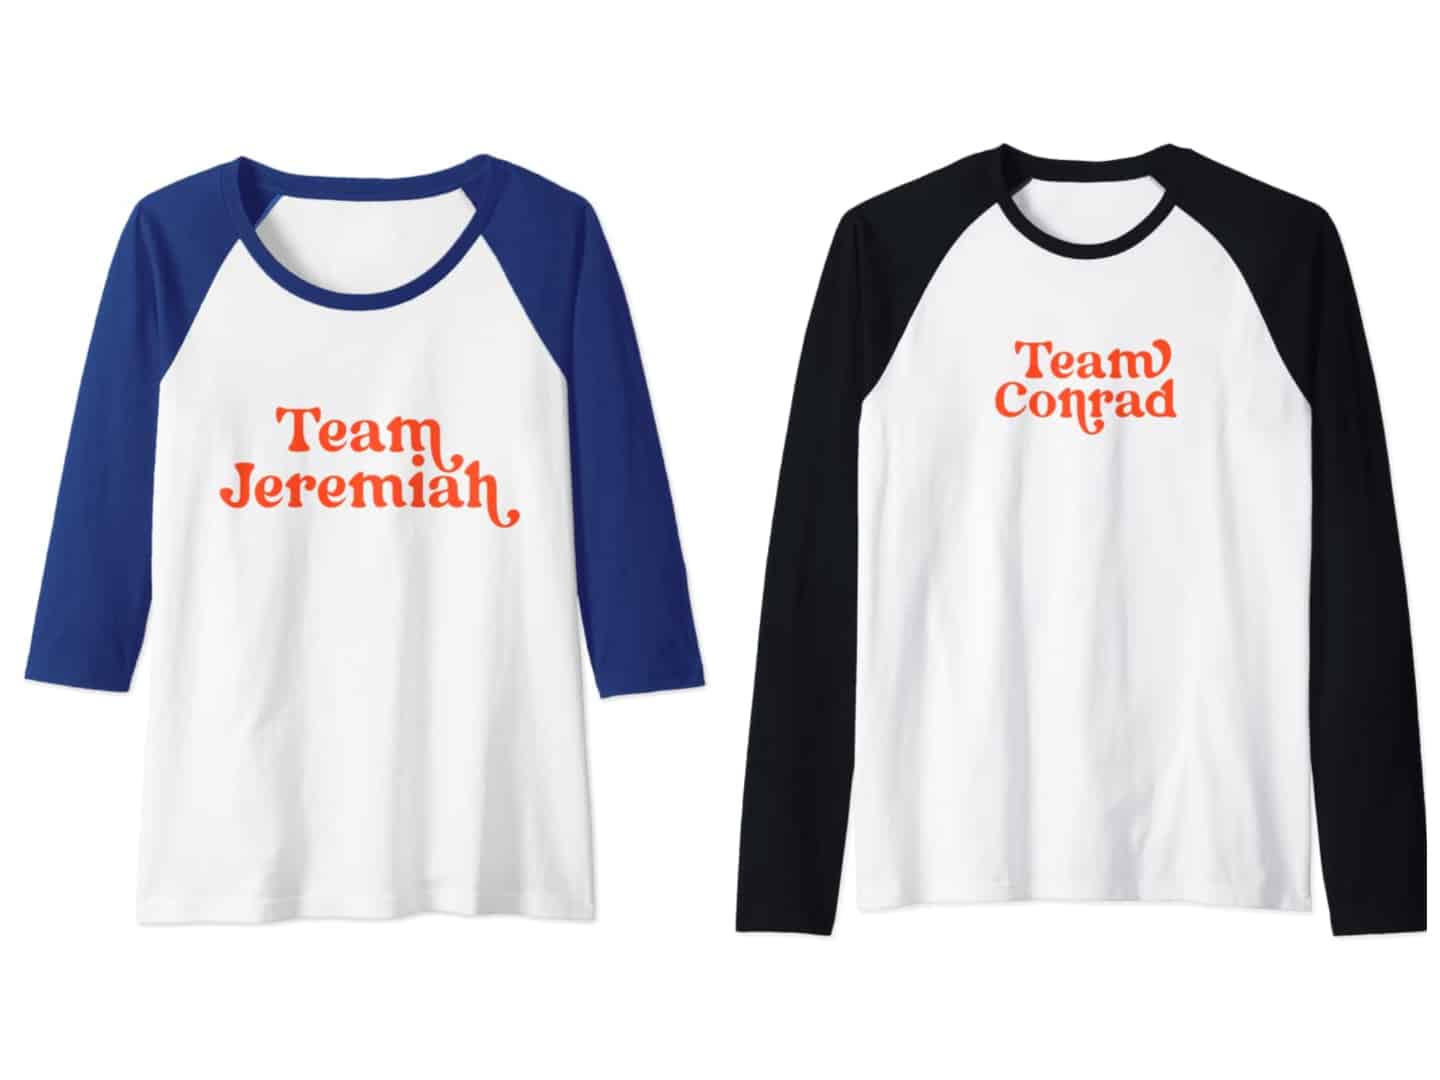 Fans of the book and series can get their hands on the Team Jeremiah or Team Conrad t-shirts.